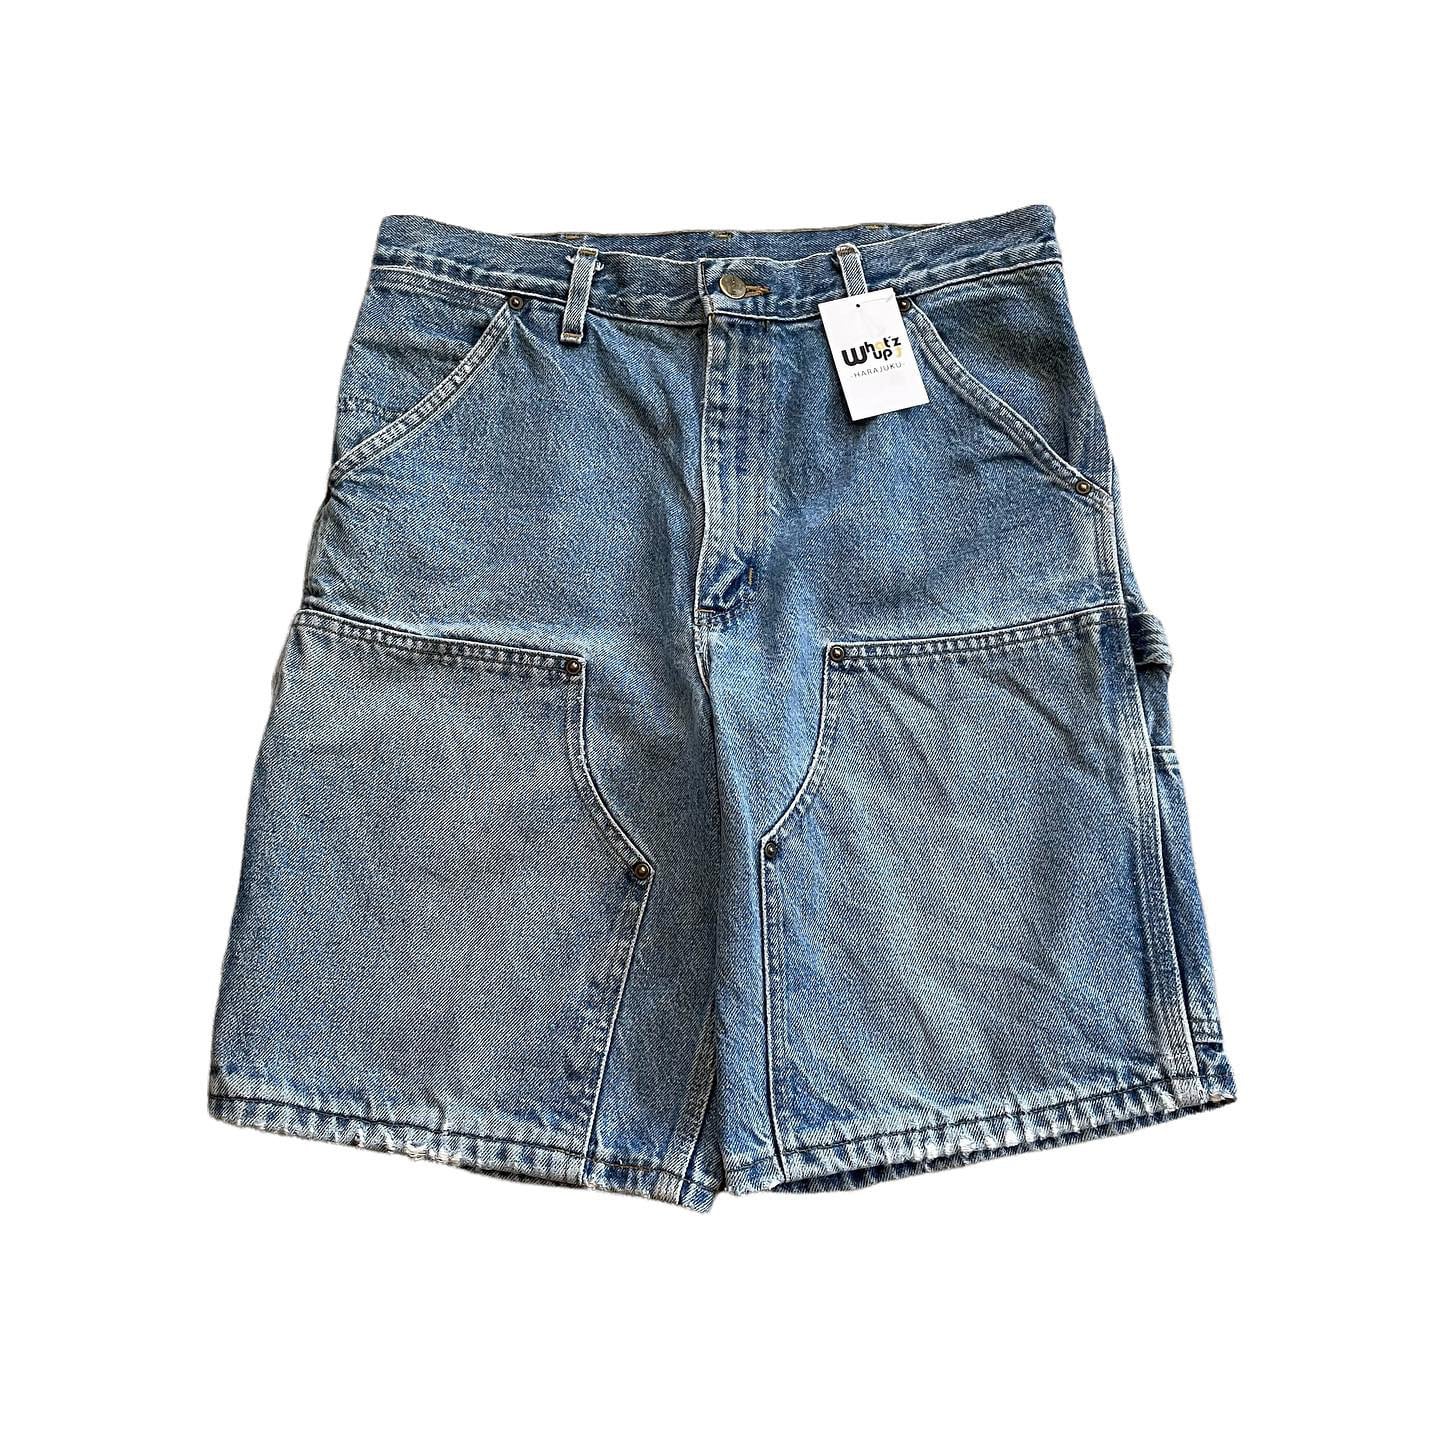 90s carhartt double knee denim shorts | What'z up